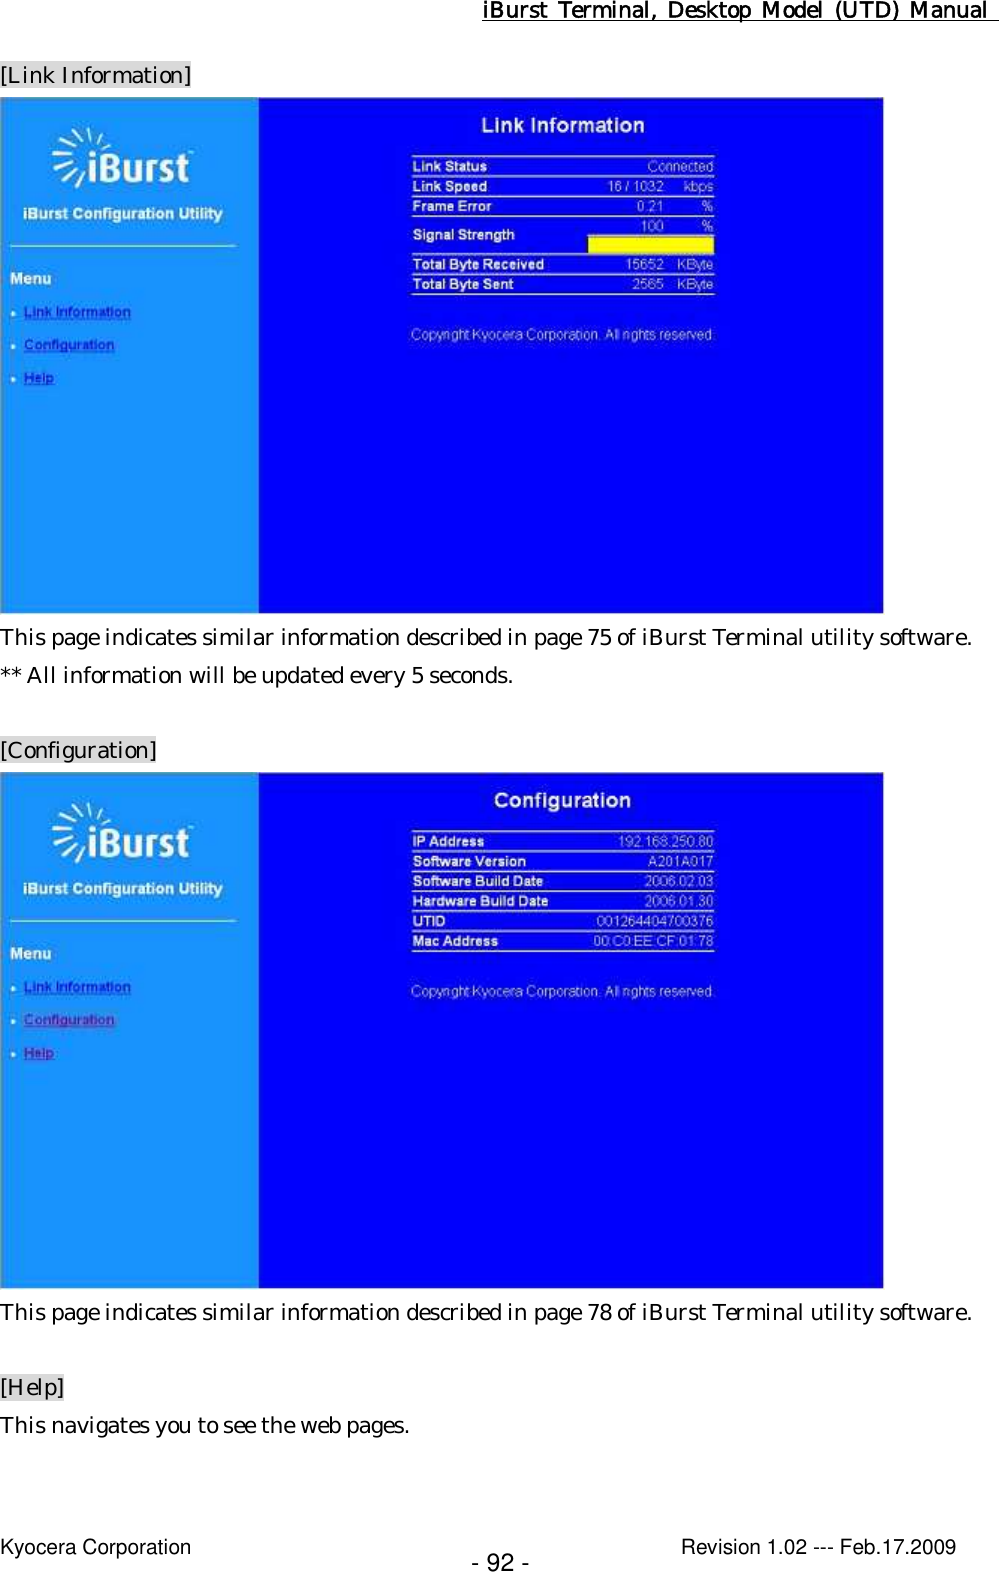 iBurst  Terminal, Desktop  Model  (UTD)  Manual    Kyocera Corporation                                                                                              Revision 1.02 --- Feb.17.2009 - 92 - [Link Information]  This page indicates similar information described in page 75 of iBurst Terminal utility software. ** All information will be updated every 5 seconds.  [Configuration]  This page indicates similar information described in page 78 of iBurst Terminal utility software.  [Help] This navigates you to see the web pages. 